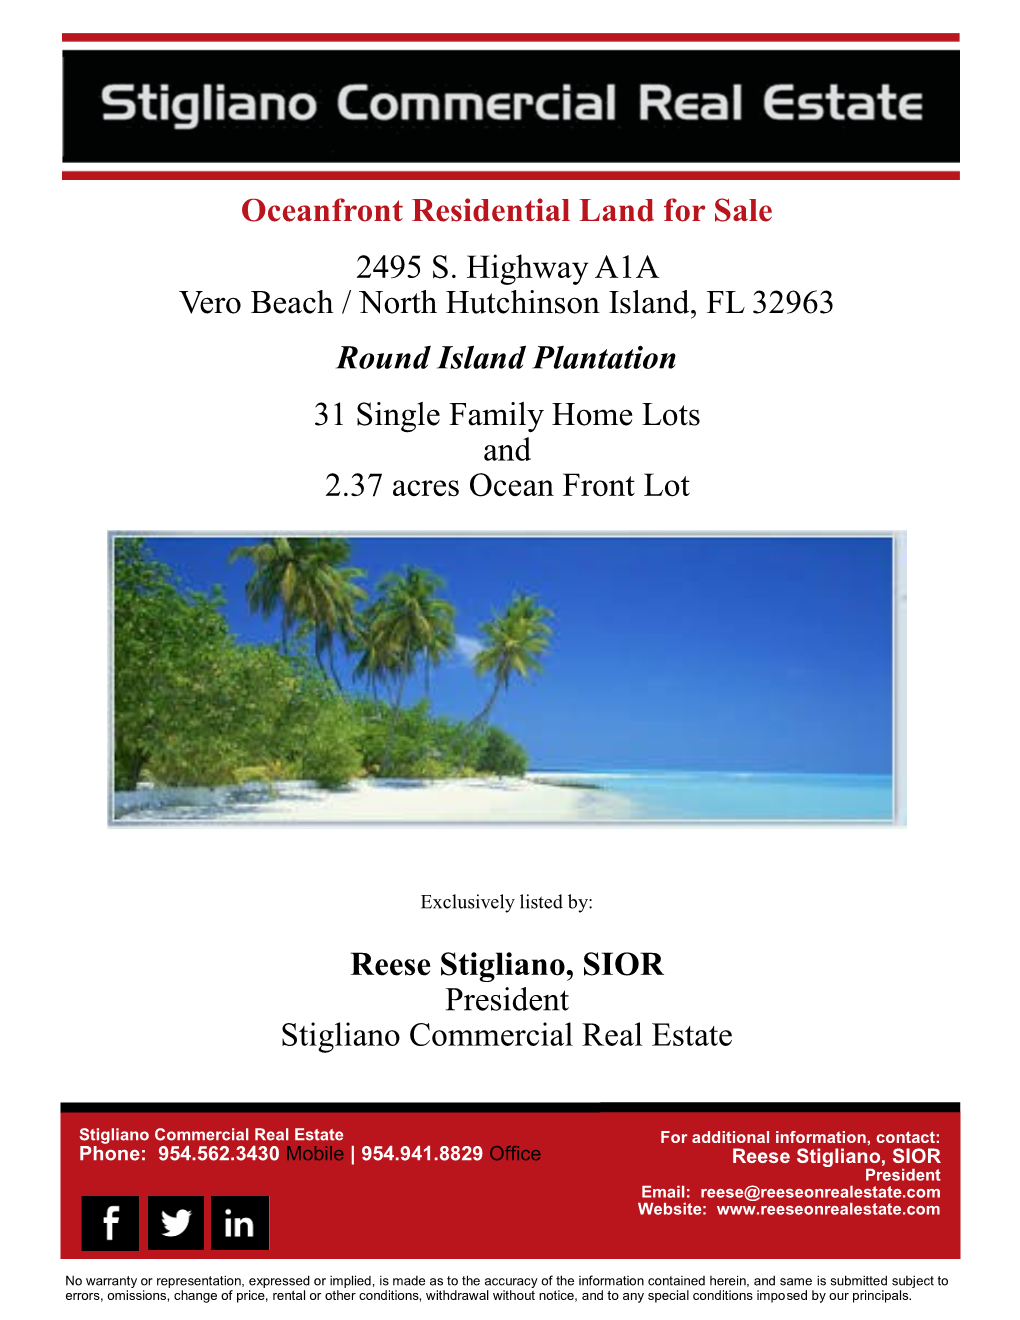 Oceanfront Residential Land for Sale 2495 S. Highway A1A Vero Beach / North Hutchinson Island, FL 32963 Round Island Plantation